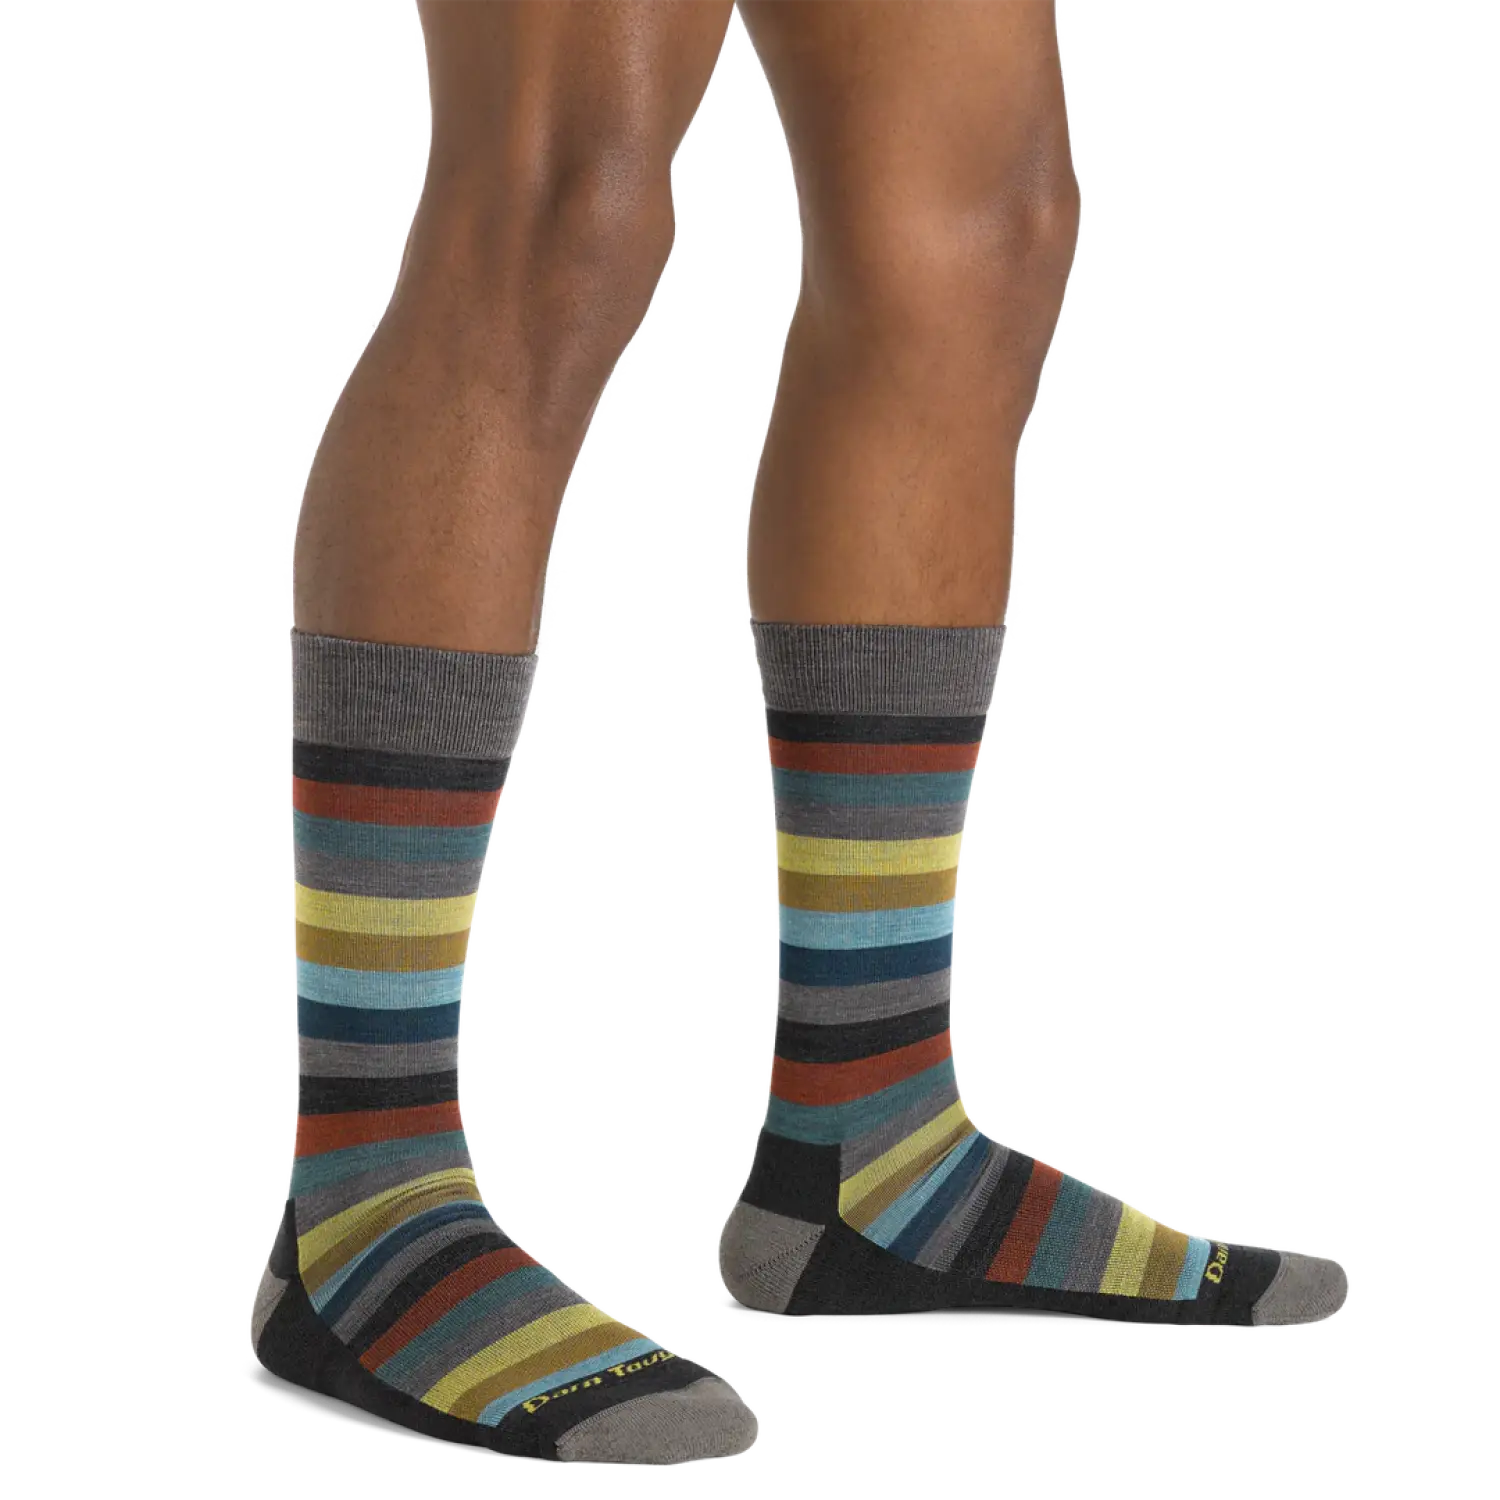 Darn Tough Men's Merlin Crew Lightweight Lifestyle Sock shown in the Charcoal color option. Shown on model.